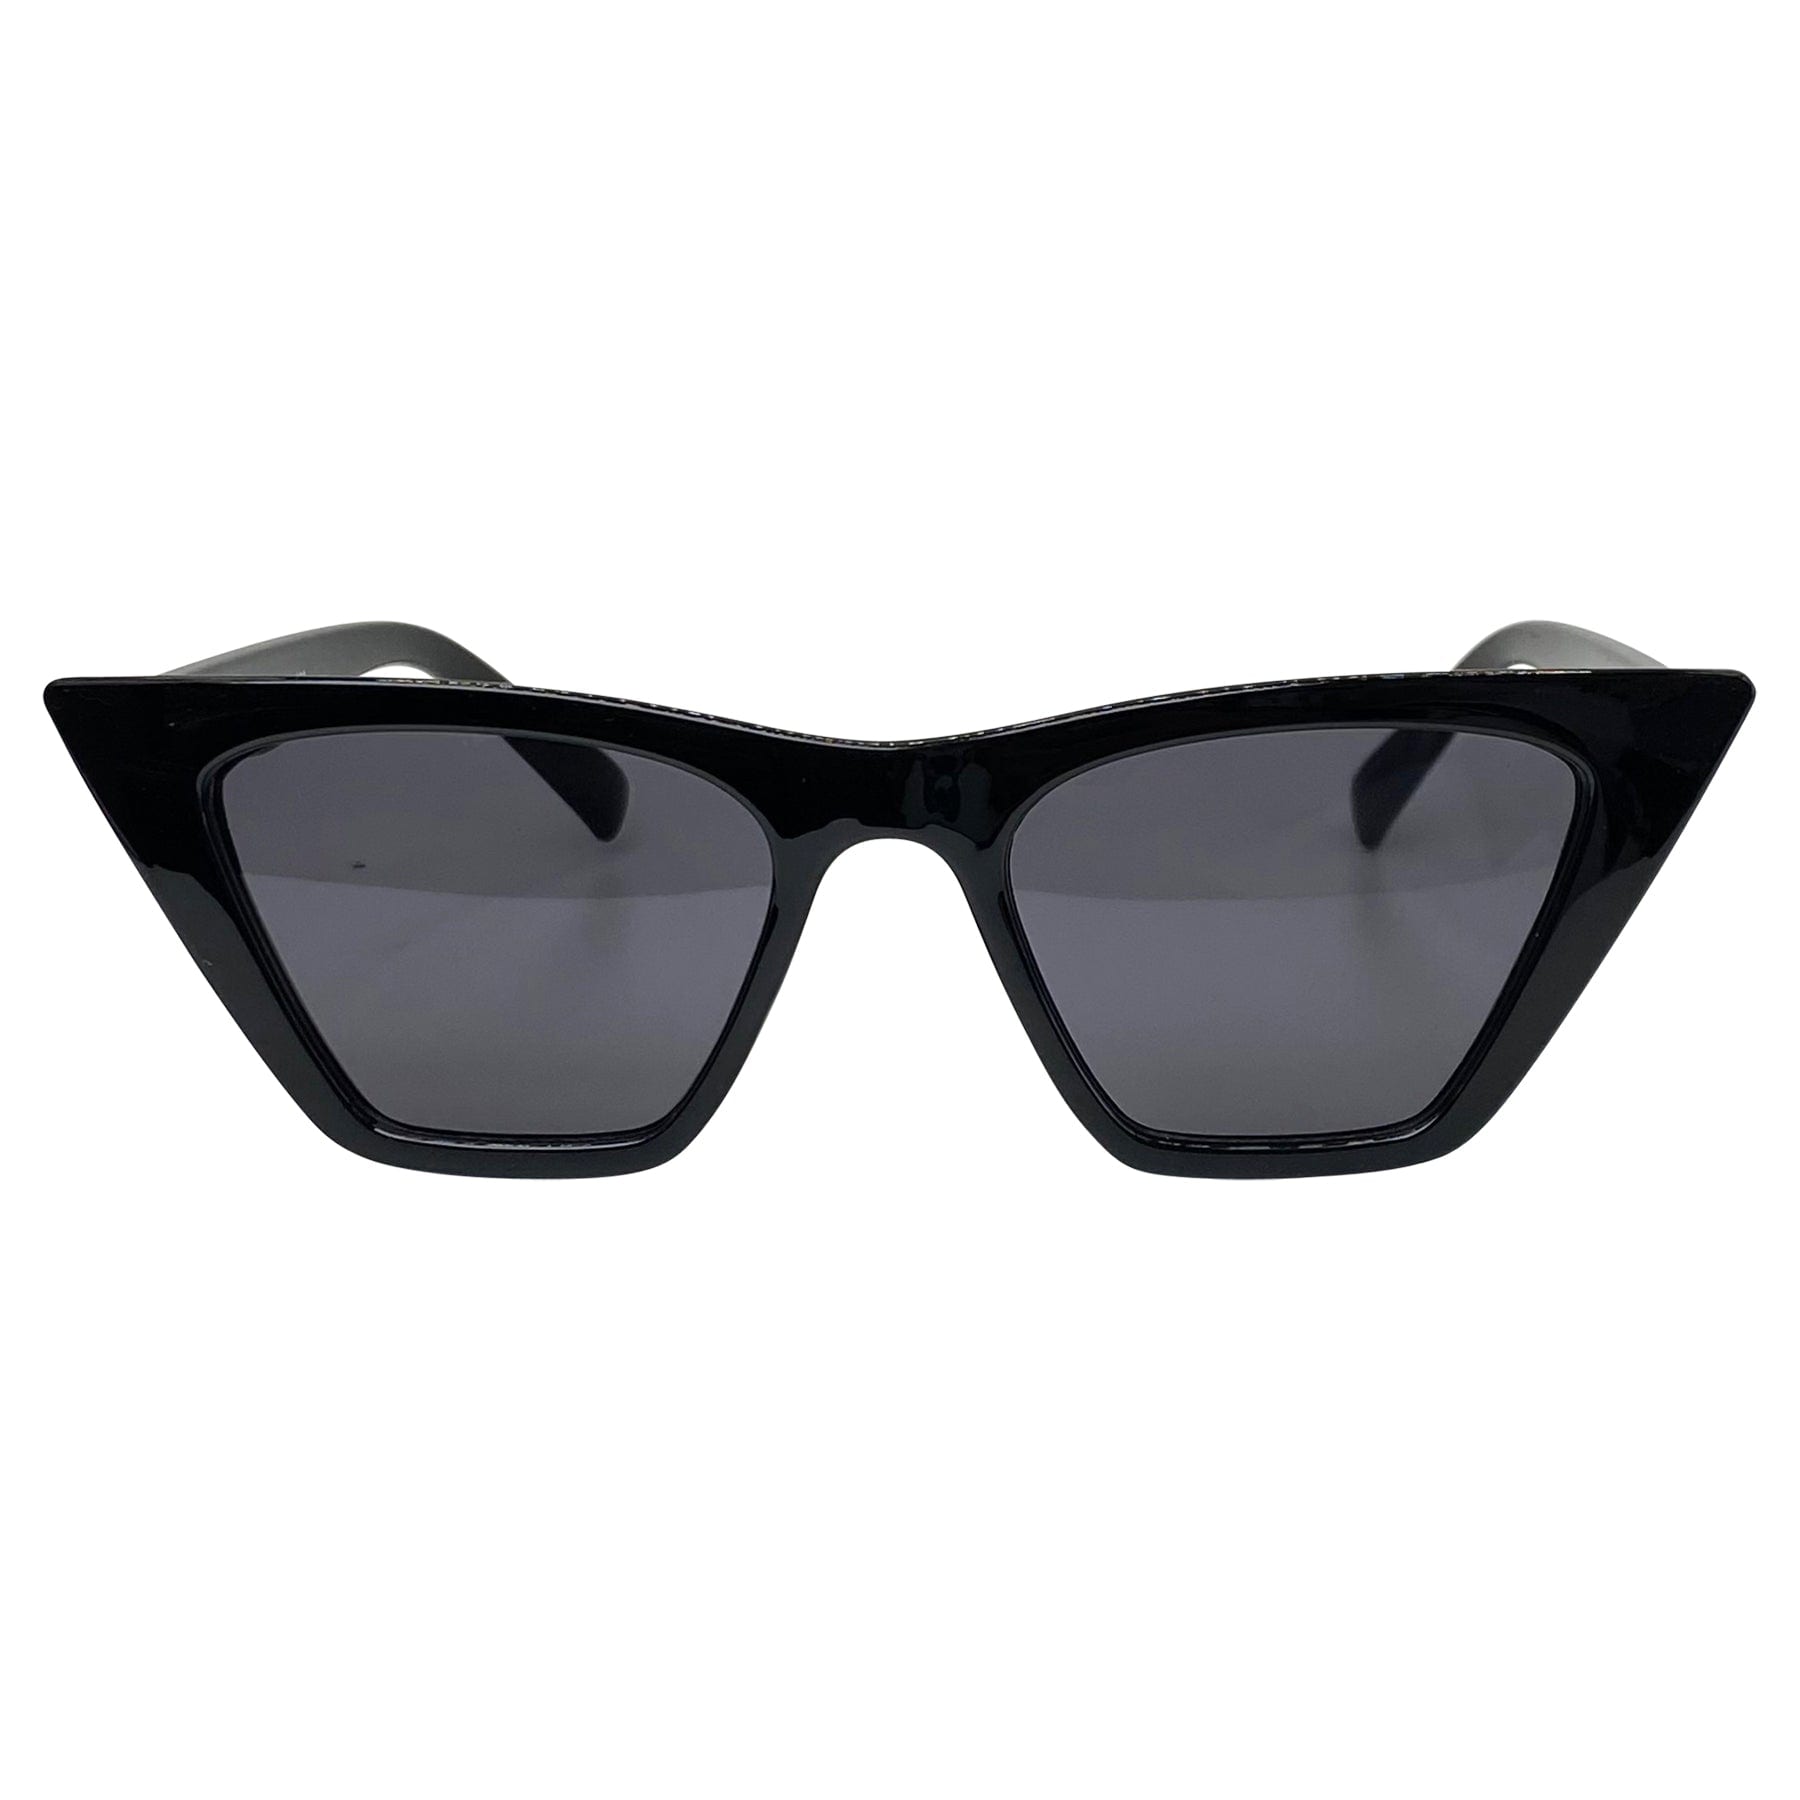 80s retro sunglasses with a gloss black color and angled cat eye shape